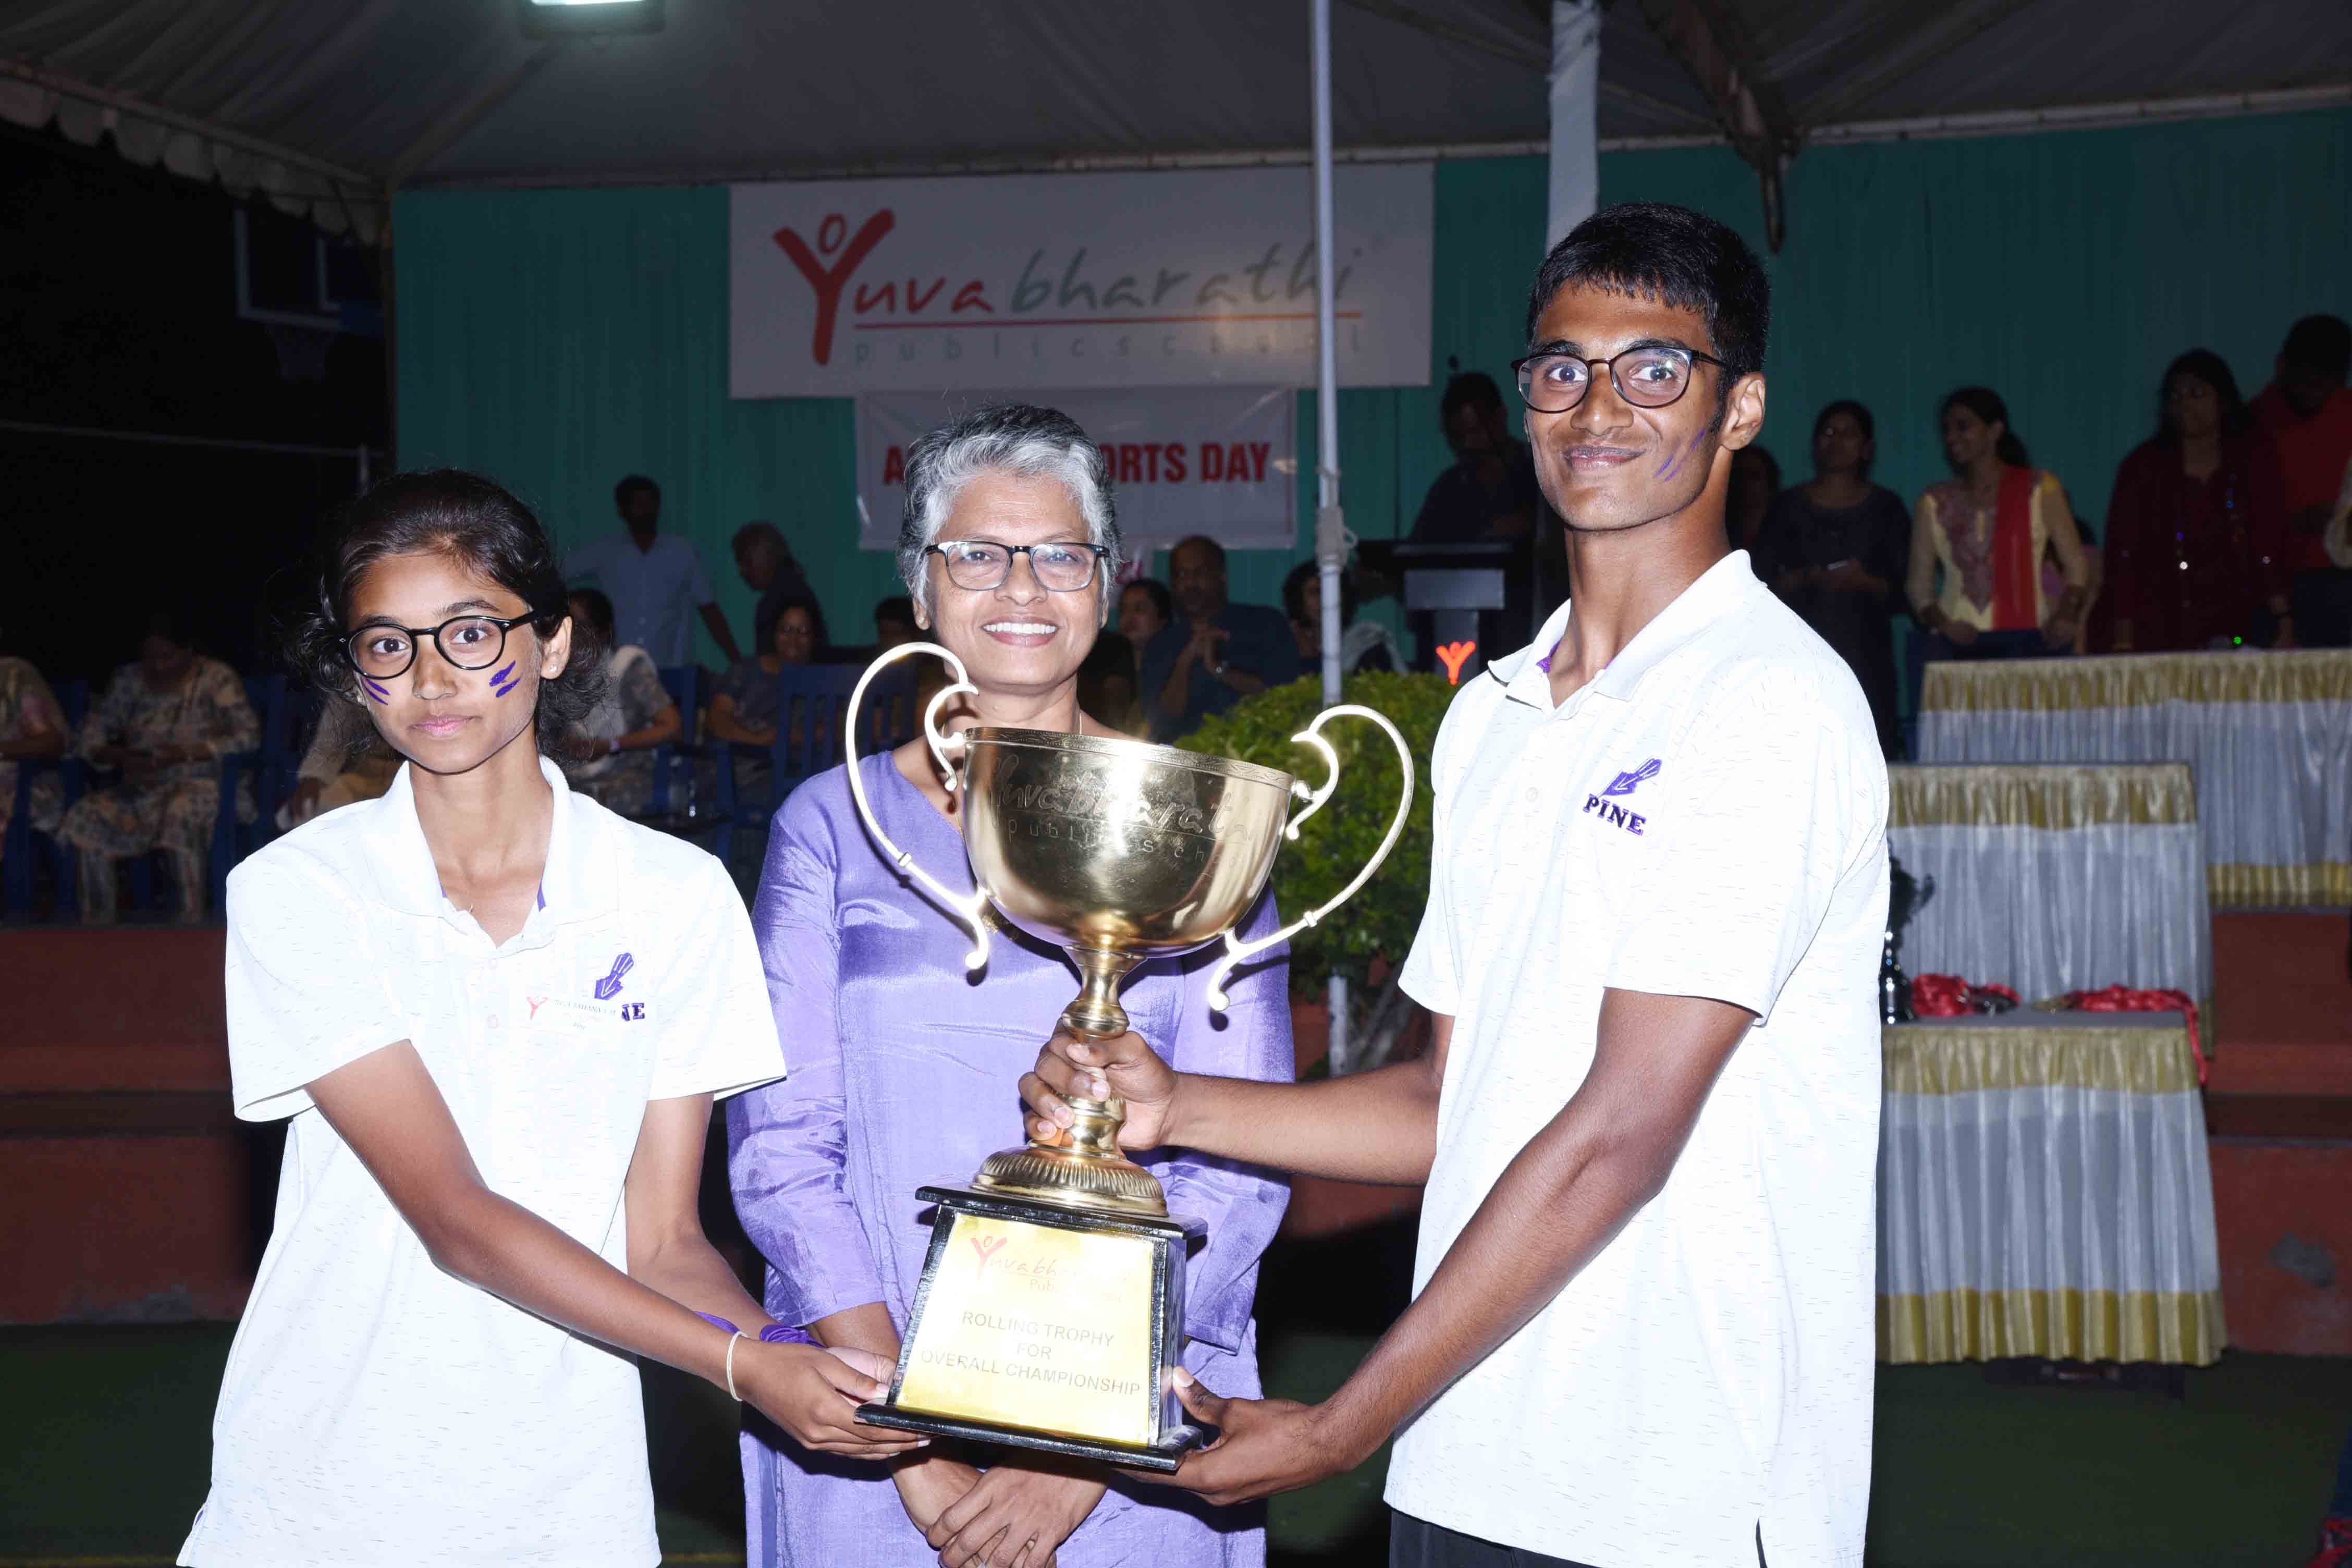 The Pine House lifted Yuvabharathi's Overall Championship Trophy for the academic year 2022-23